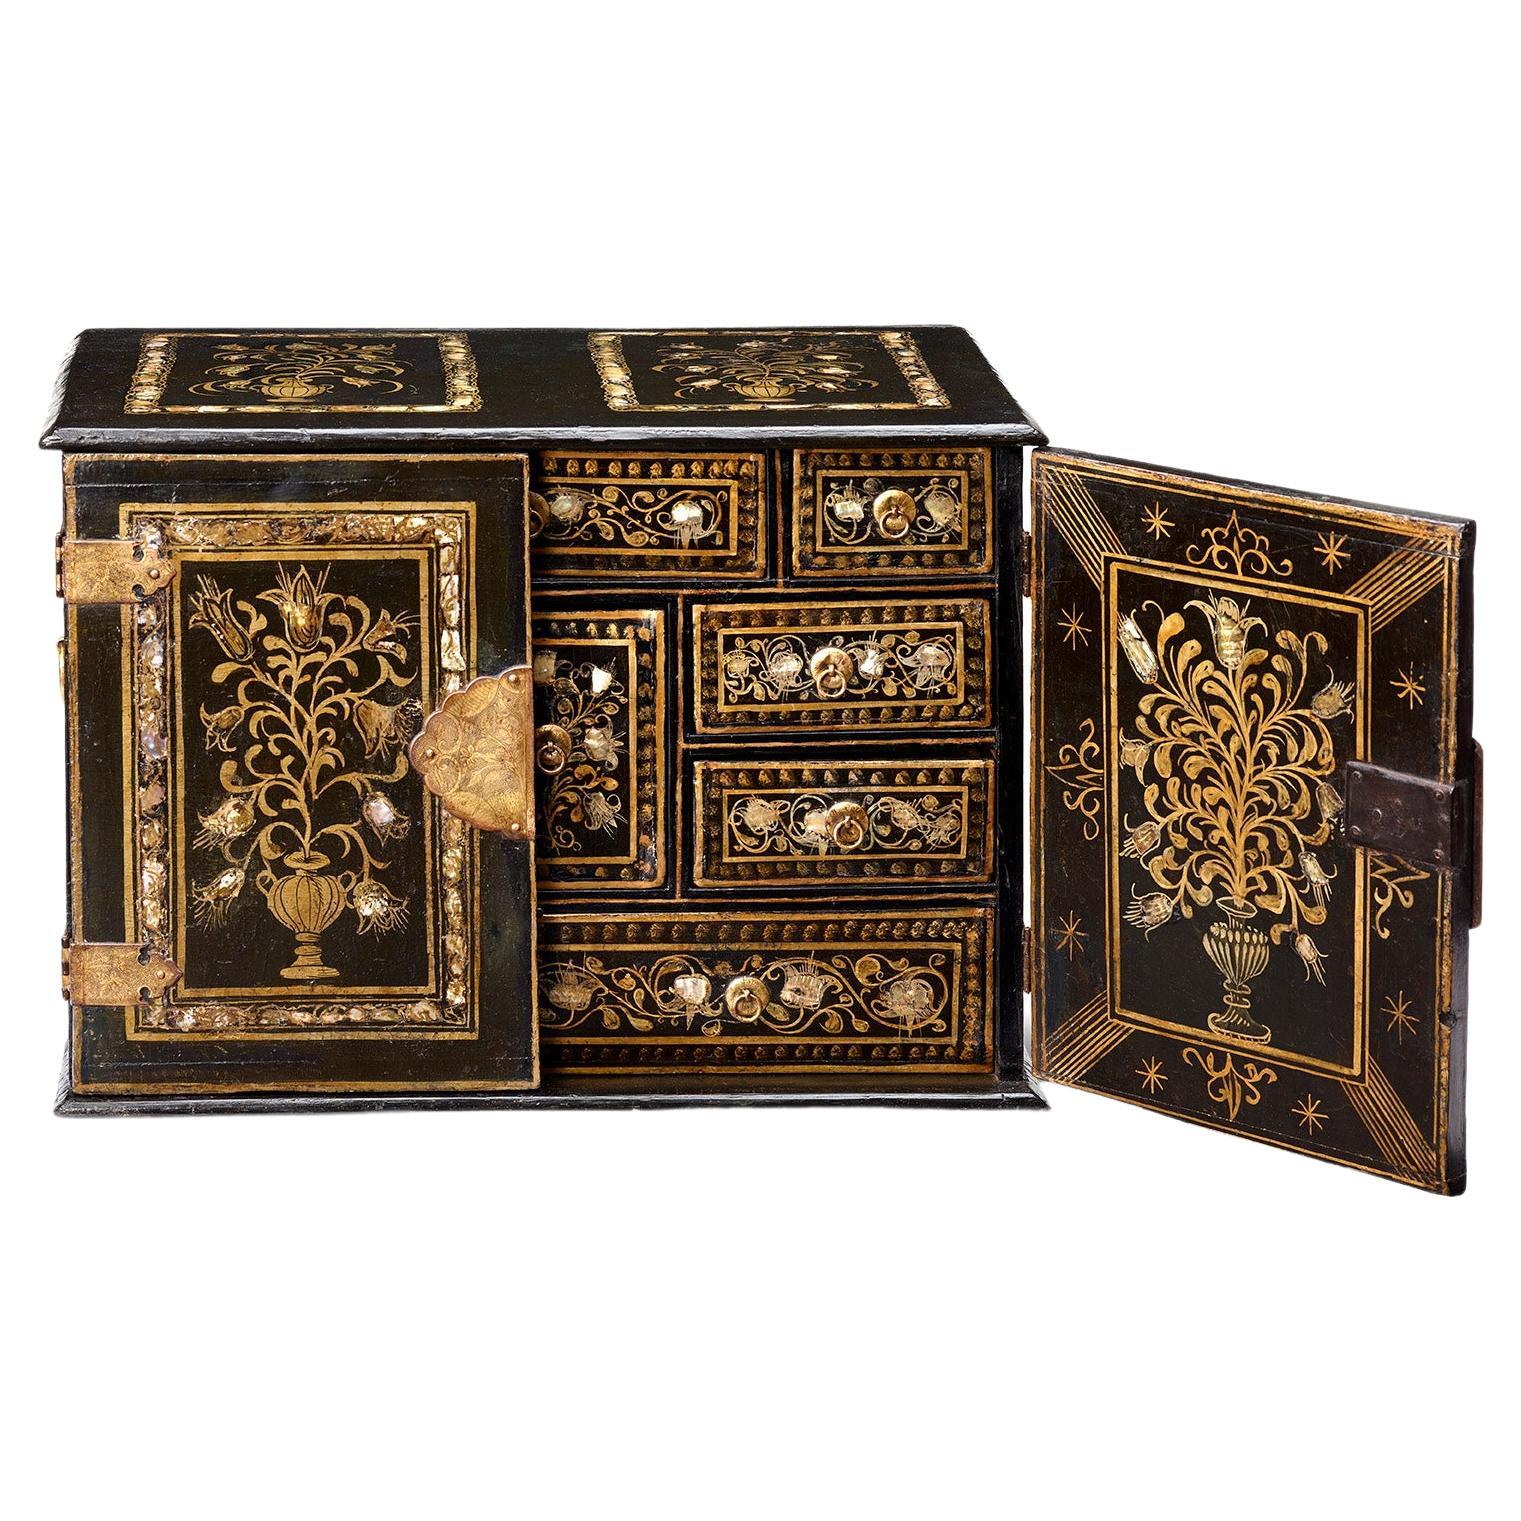 Rare 17th Century Mexican Colonial Lacquer Mother-of-pearl & Gold Inlaid Cabinet